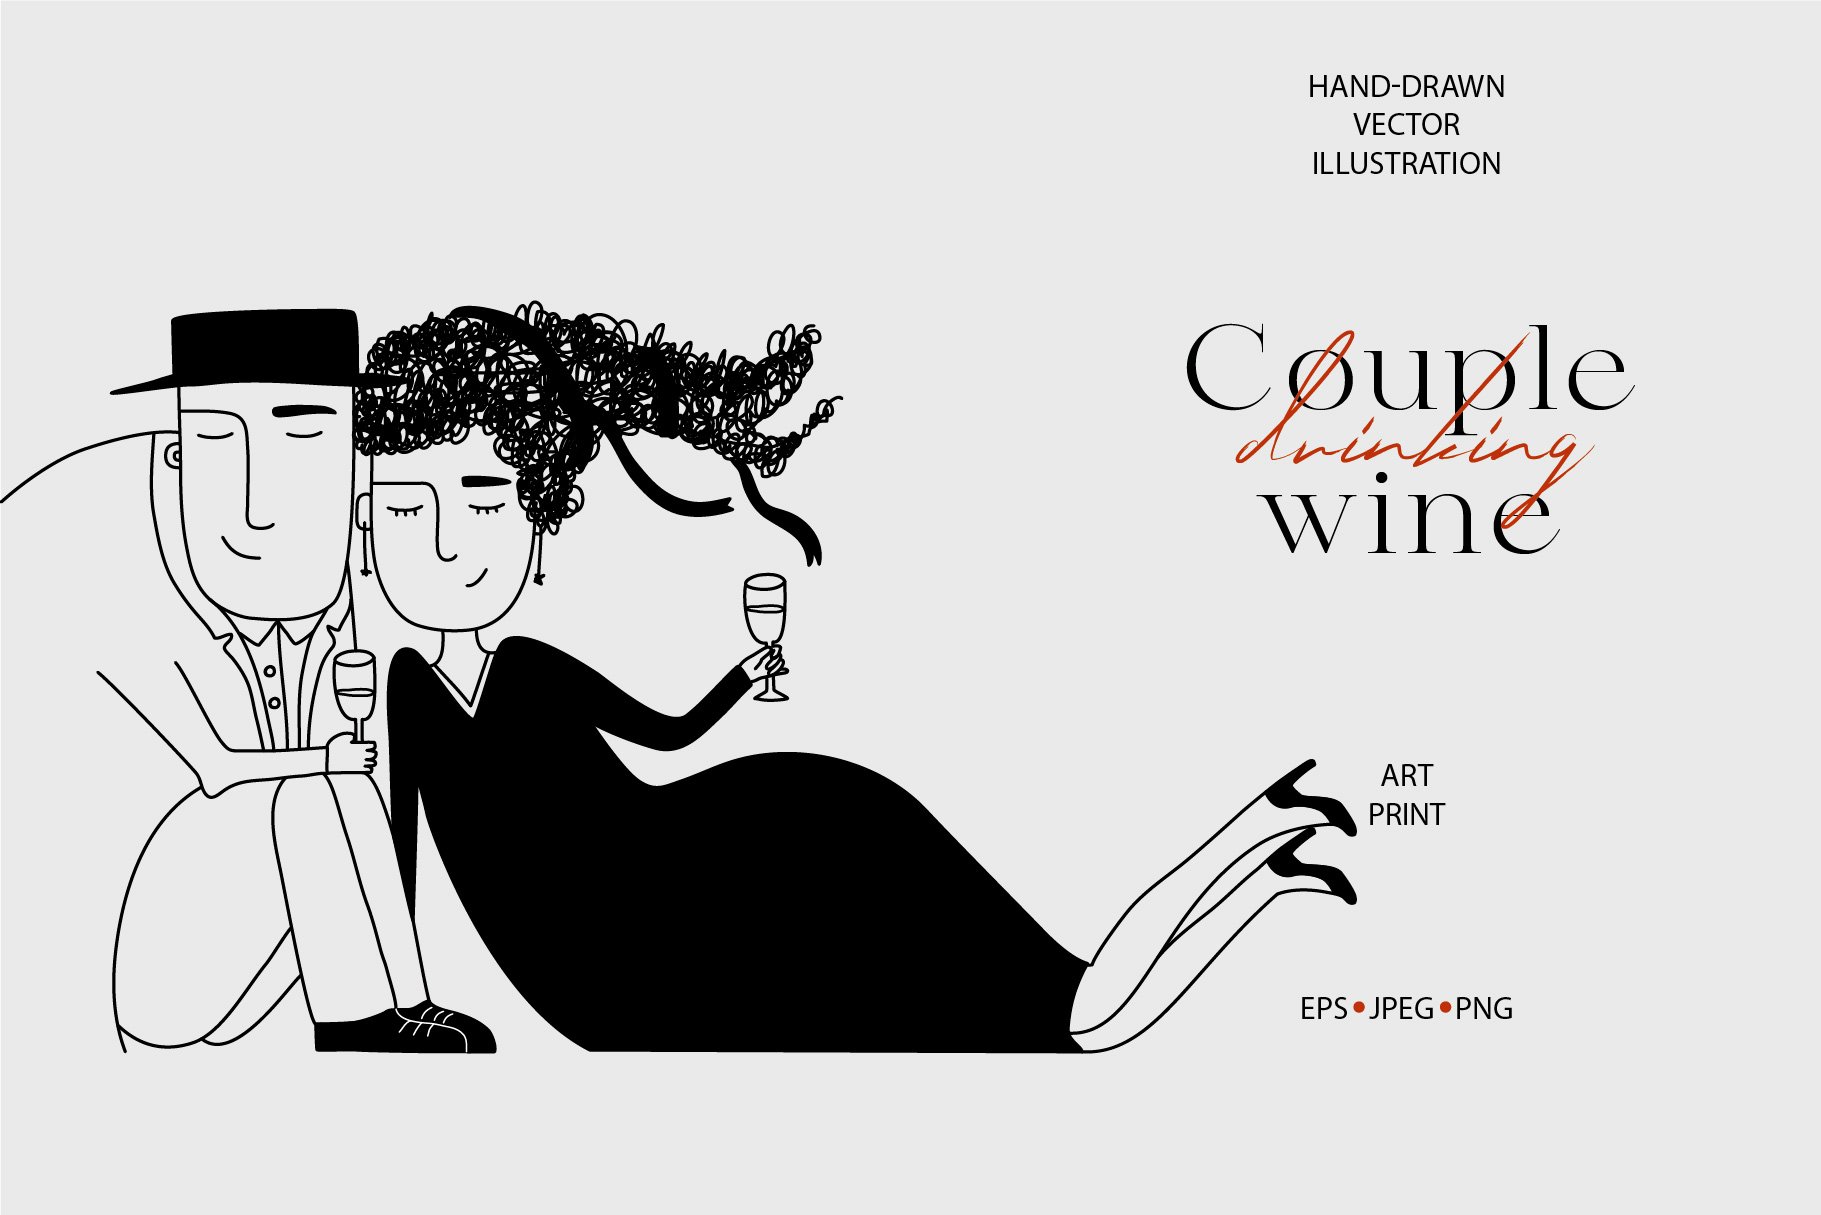 Couple drinking wine cover image.